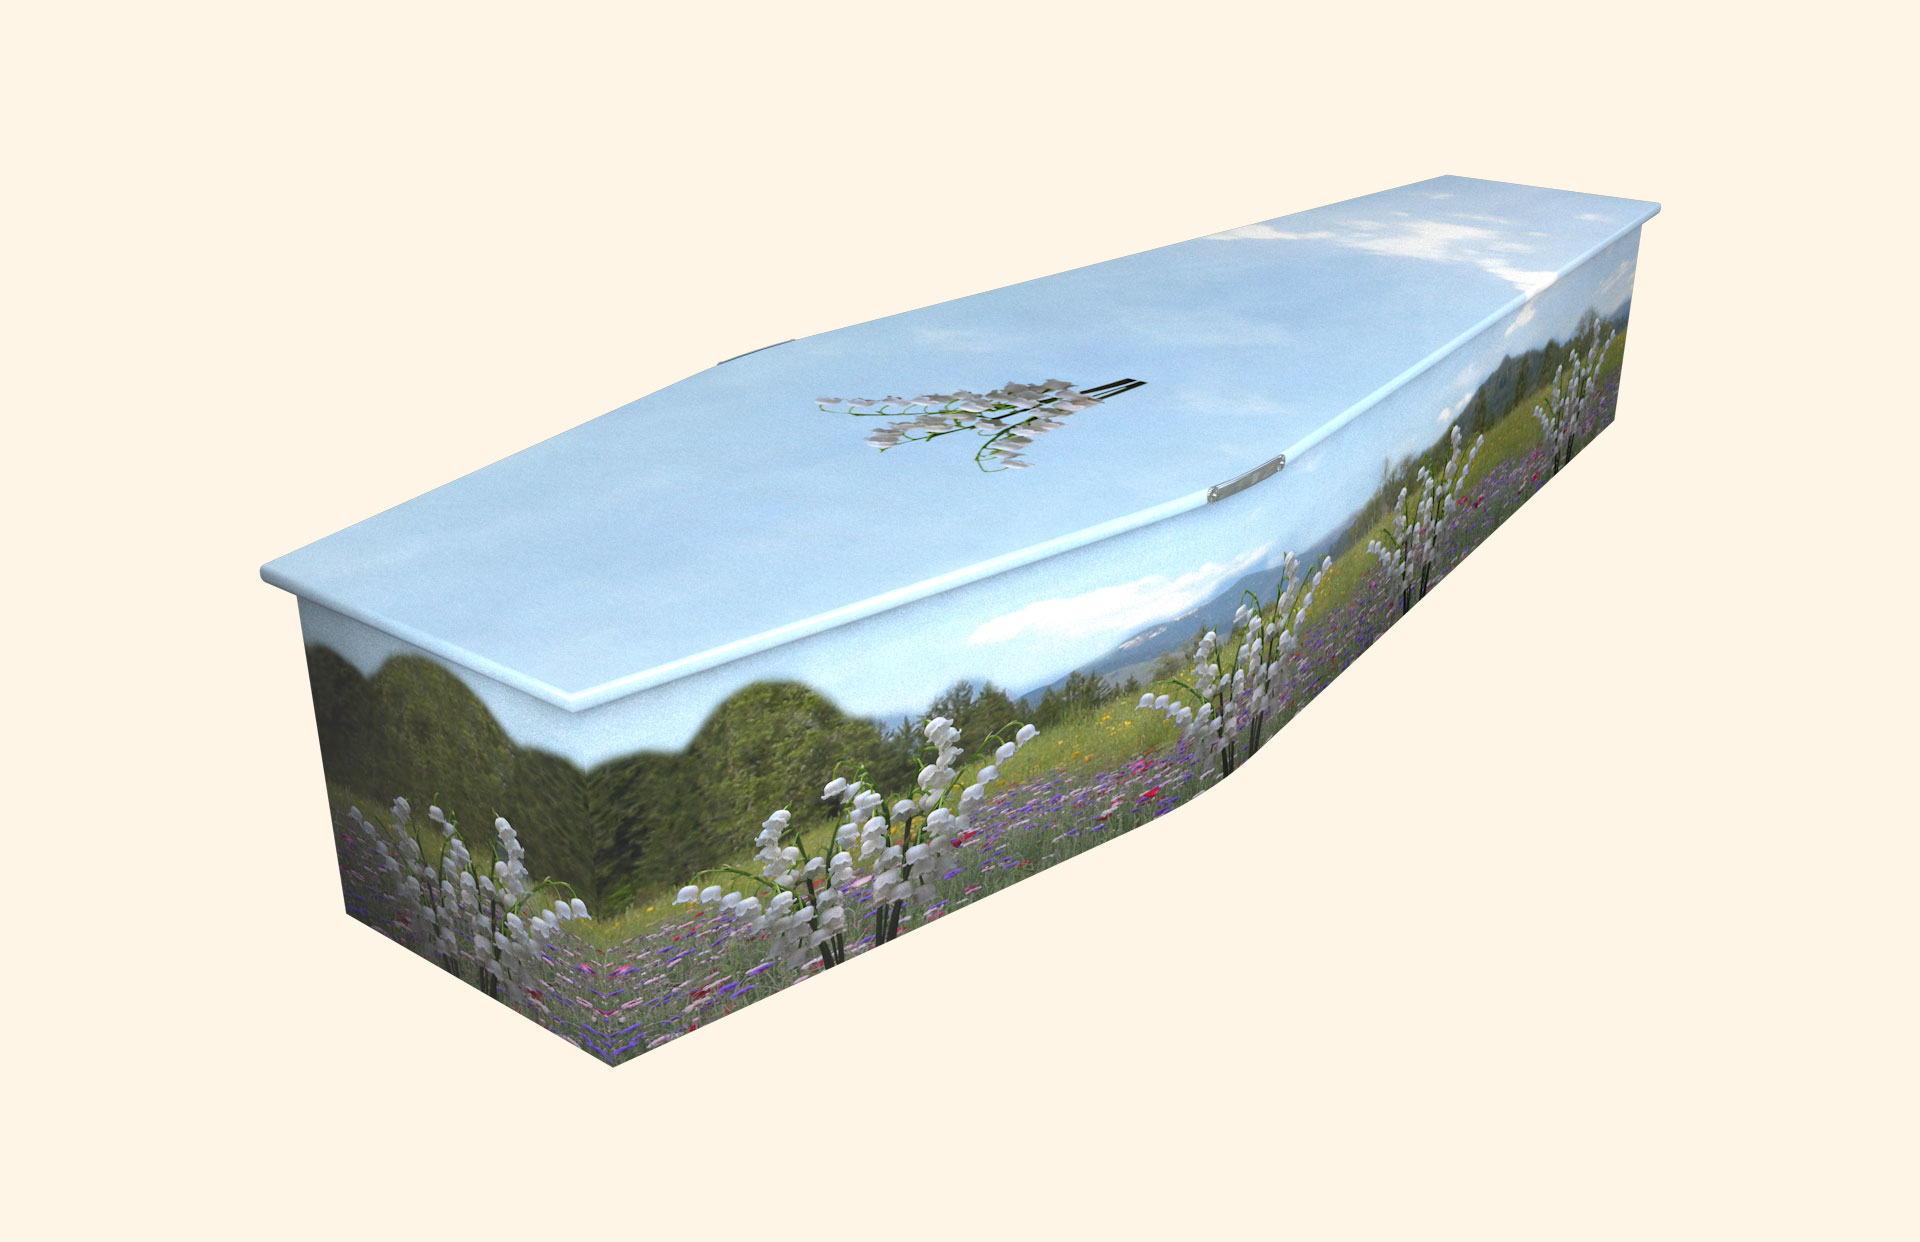 Lily of the Valley design on a traditional coffin